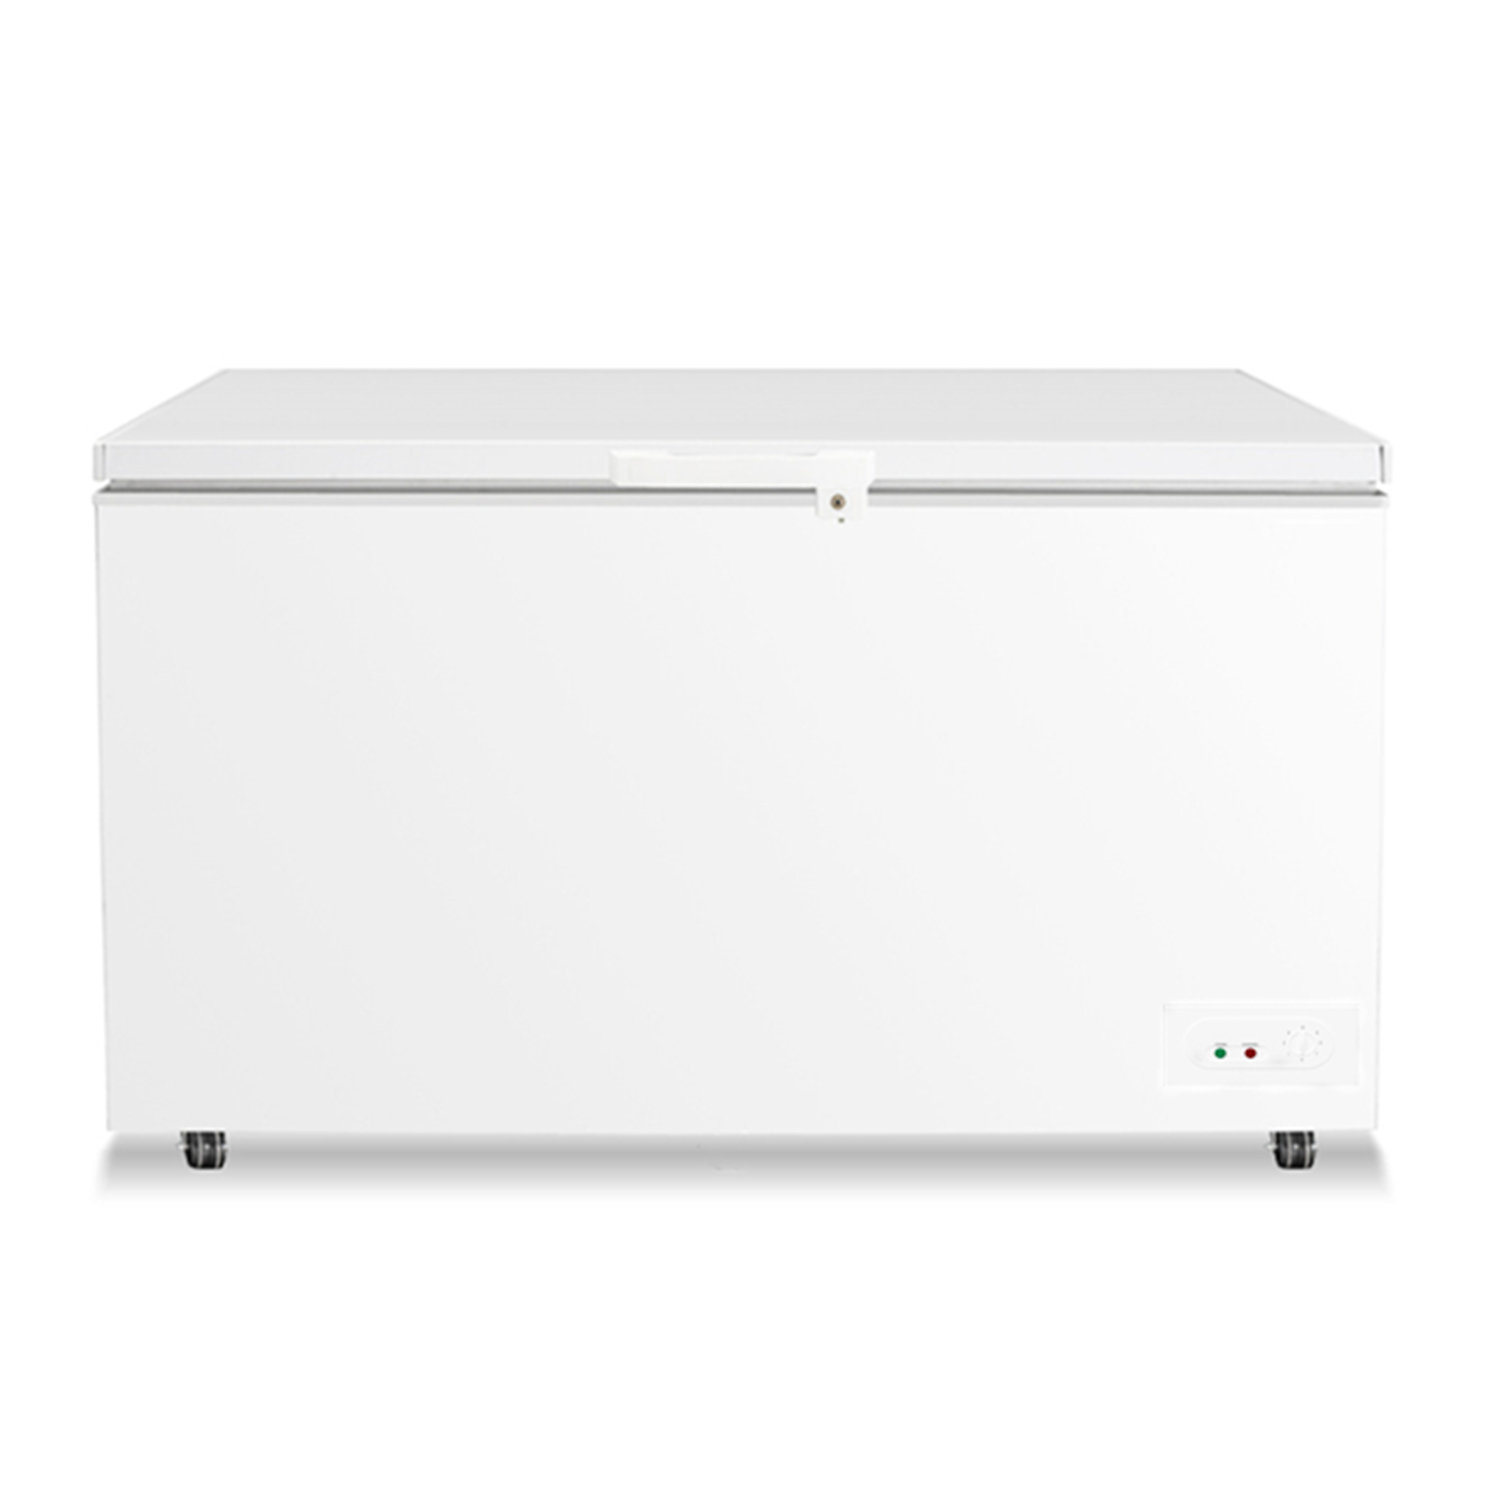 10.7 Cubic Feet Garage Ready Chest Freezer with Adjustable Temperature  Controls and LED Light